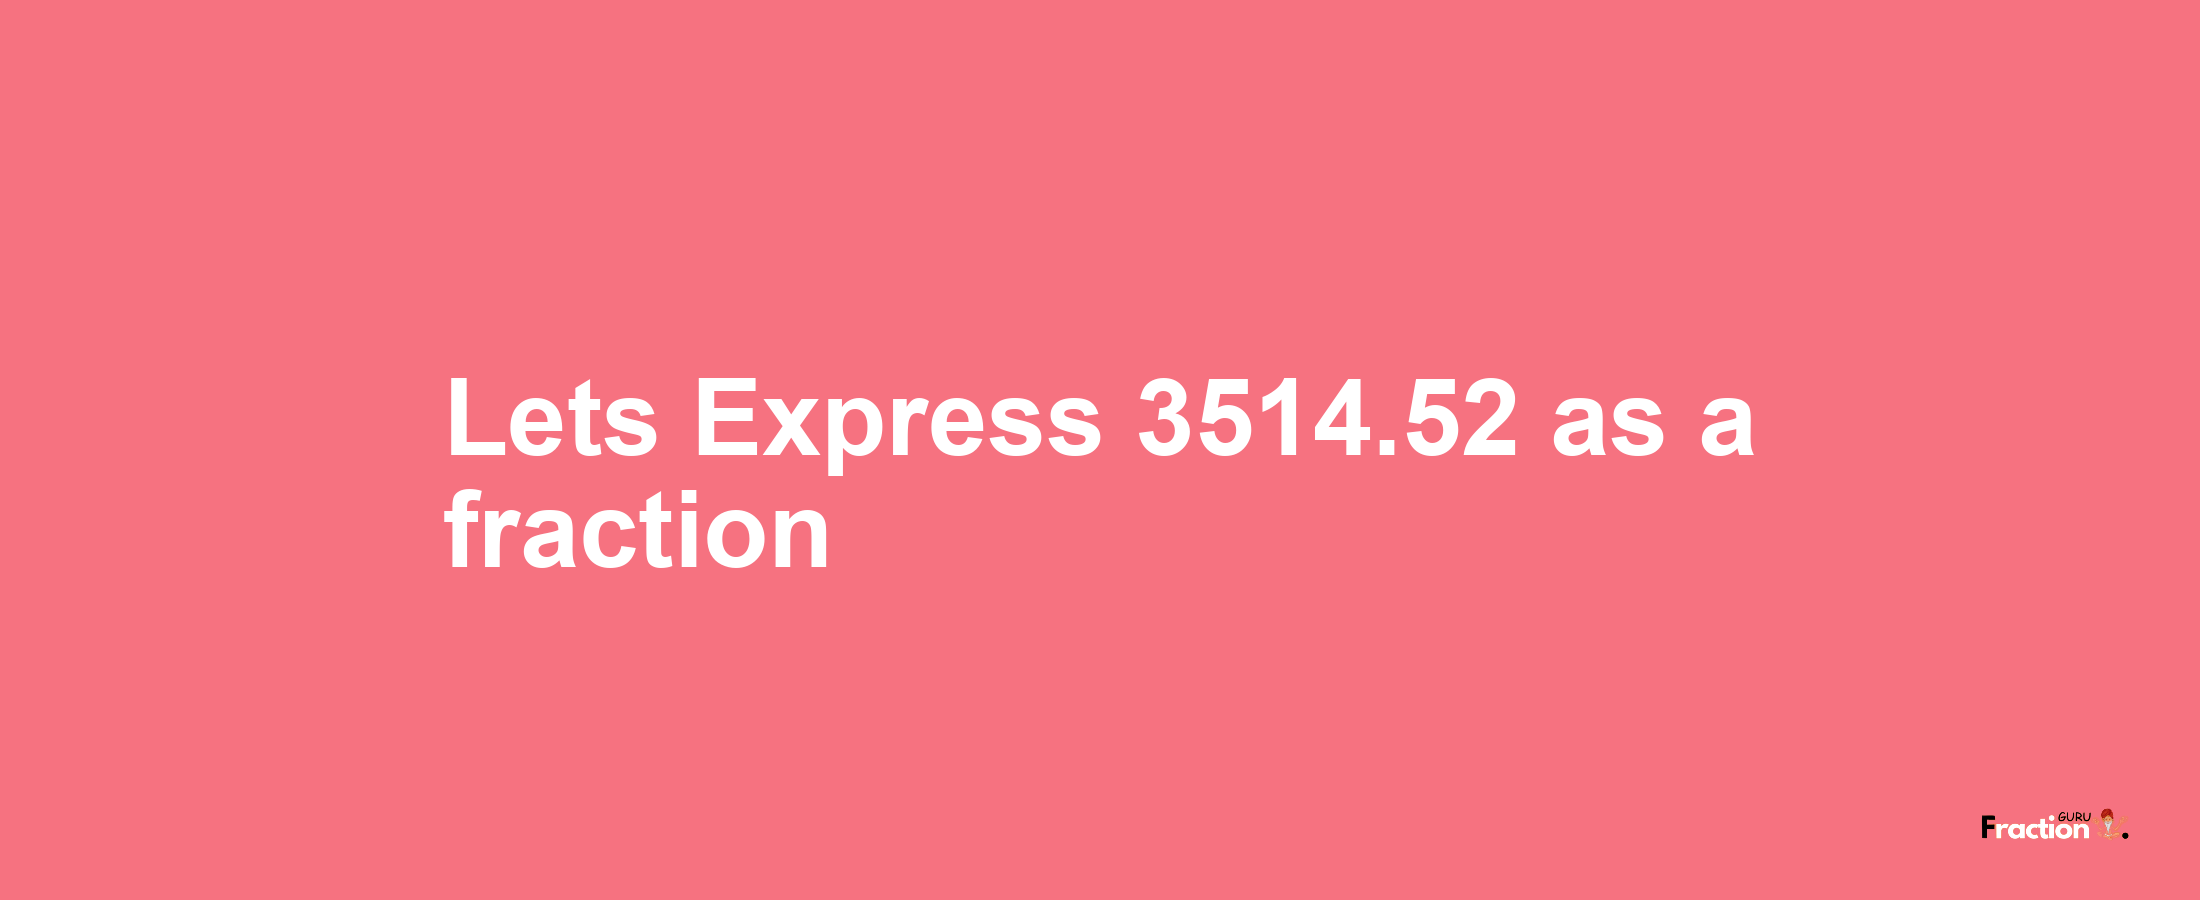 Lets Express 3514.52 as afraction